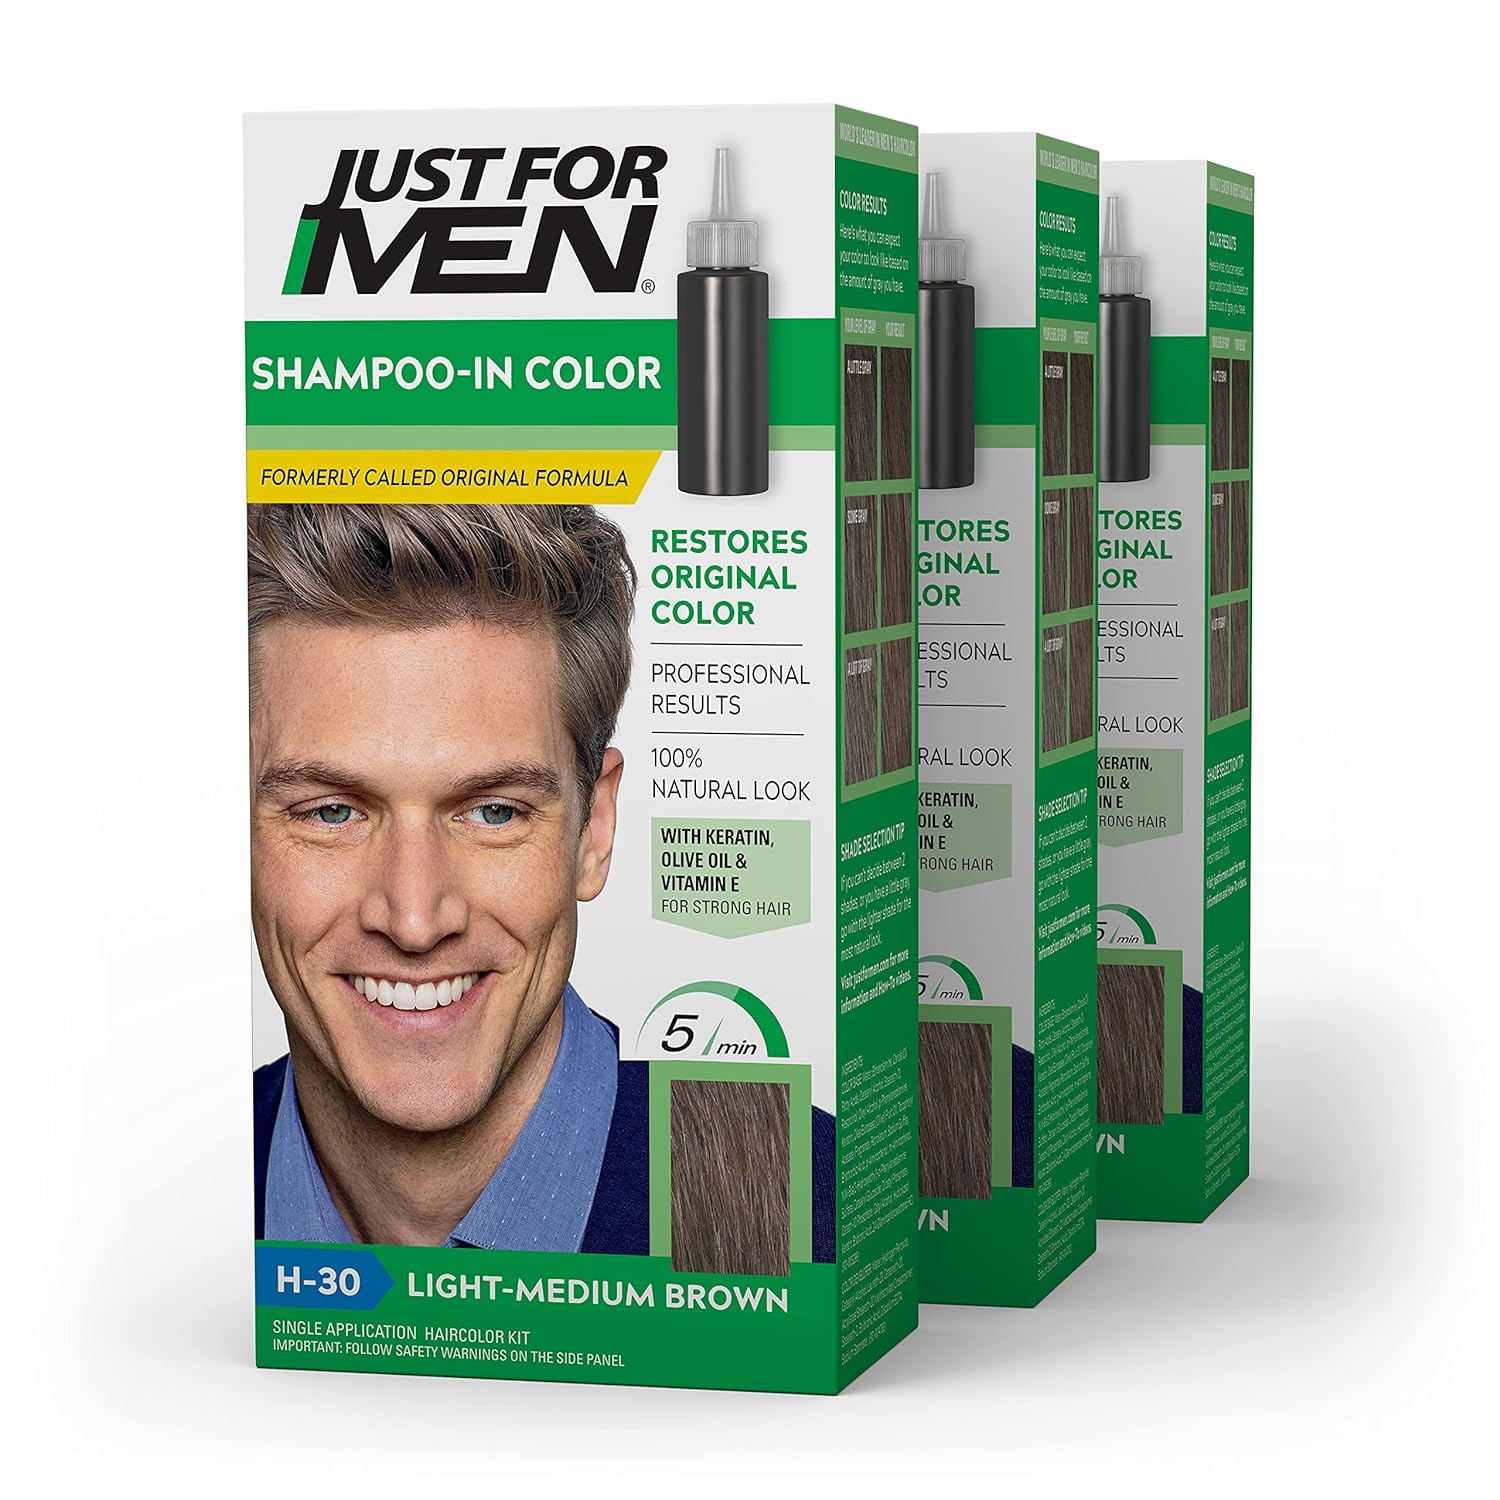 Just For Men Shampoo-In Color, Mens Hair Dye with Vitam